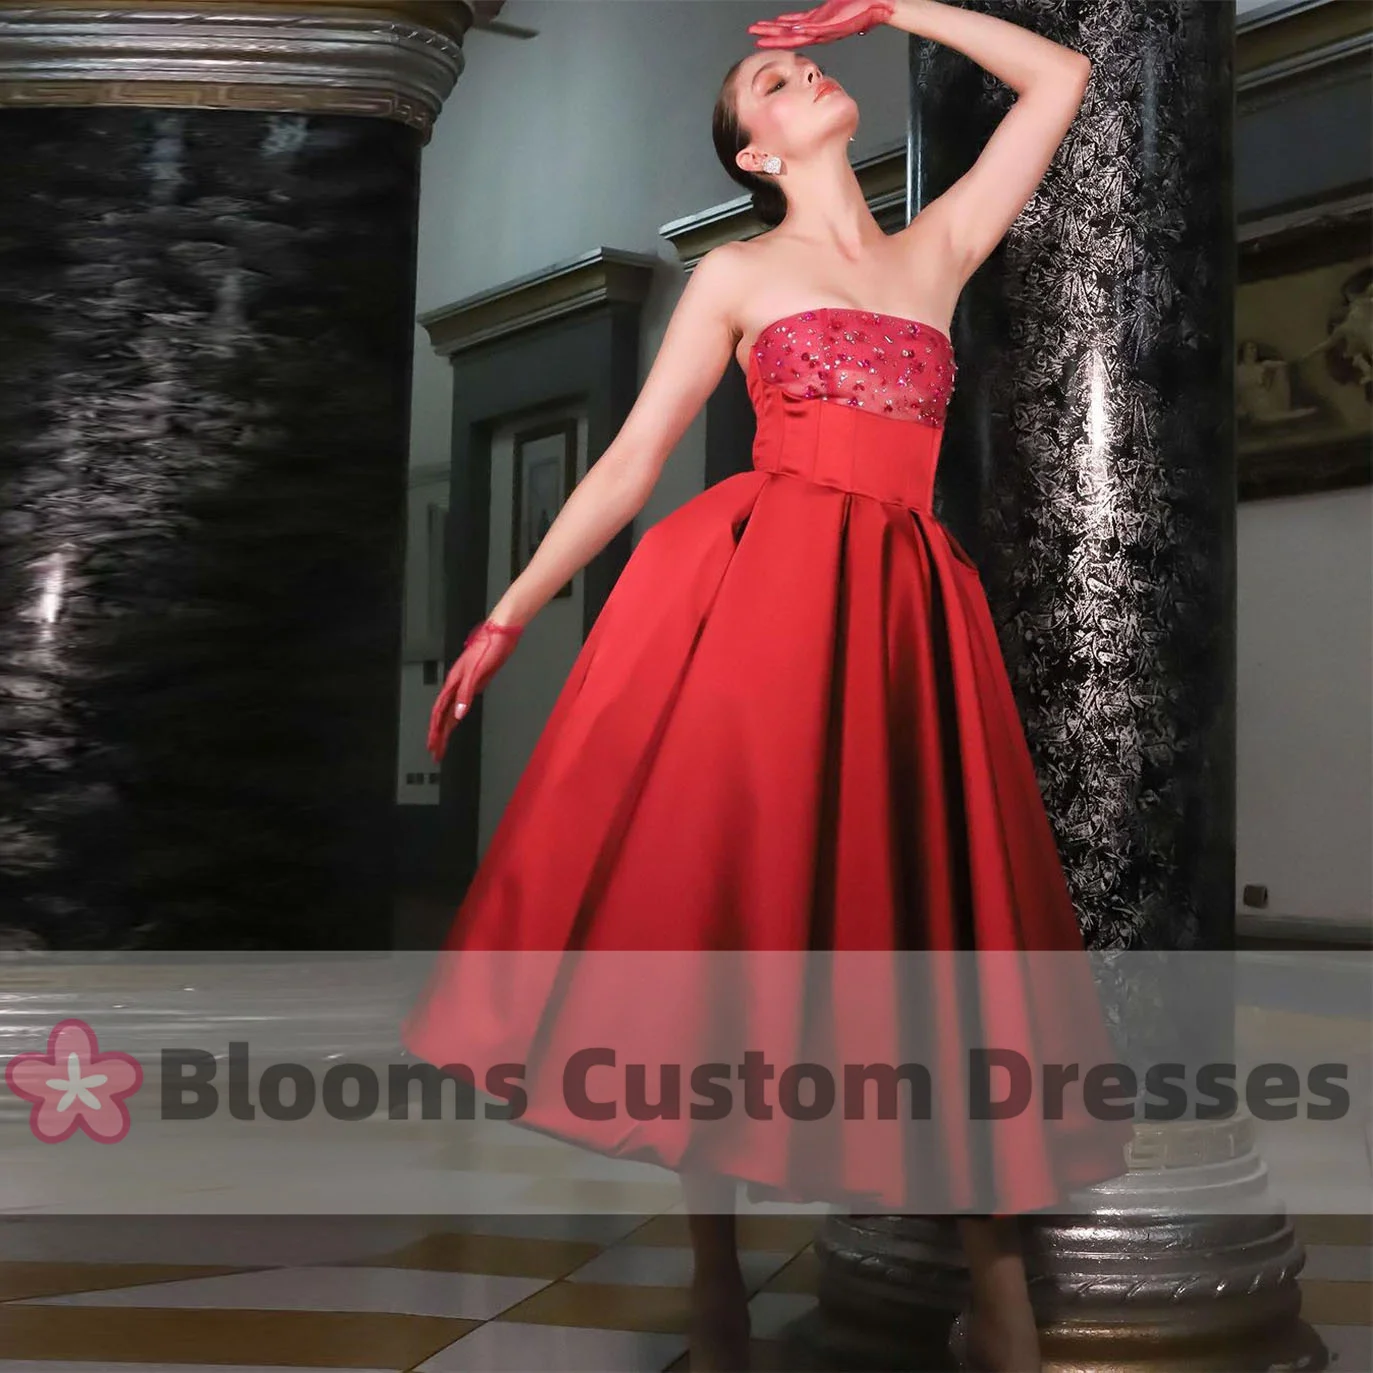 

Blooms Gorgeous Satin Red Strapless Evening Dresses A-Line Beaded Custom Prom Dress Sleeveless With Gloves Formal Occasion Gown